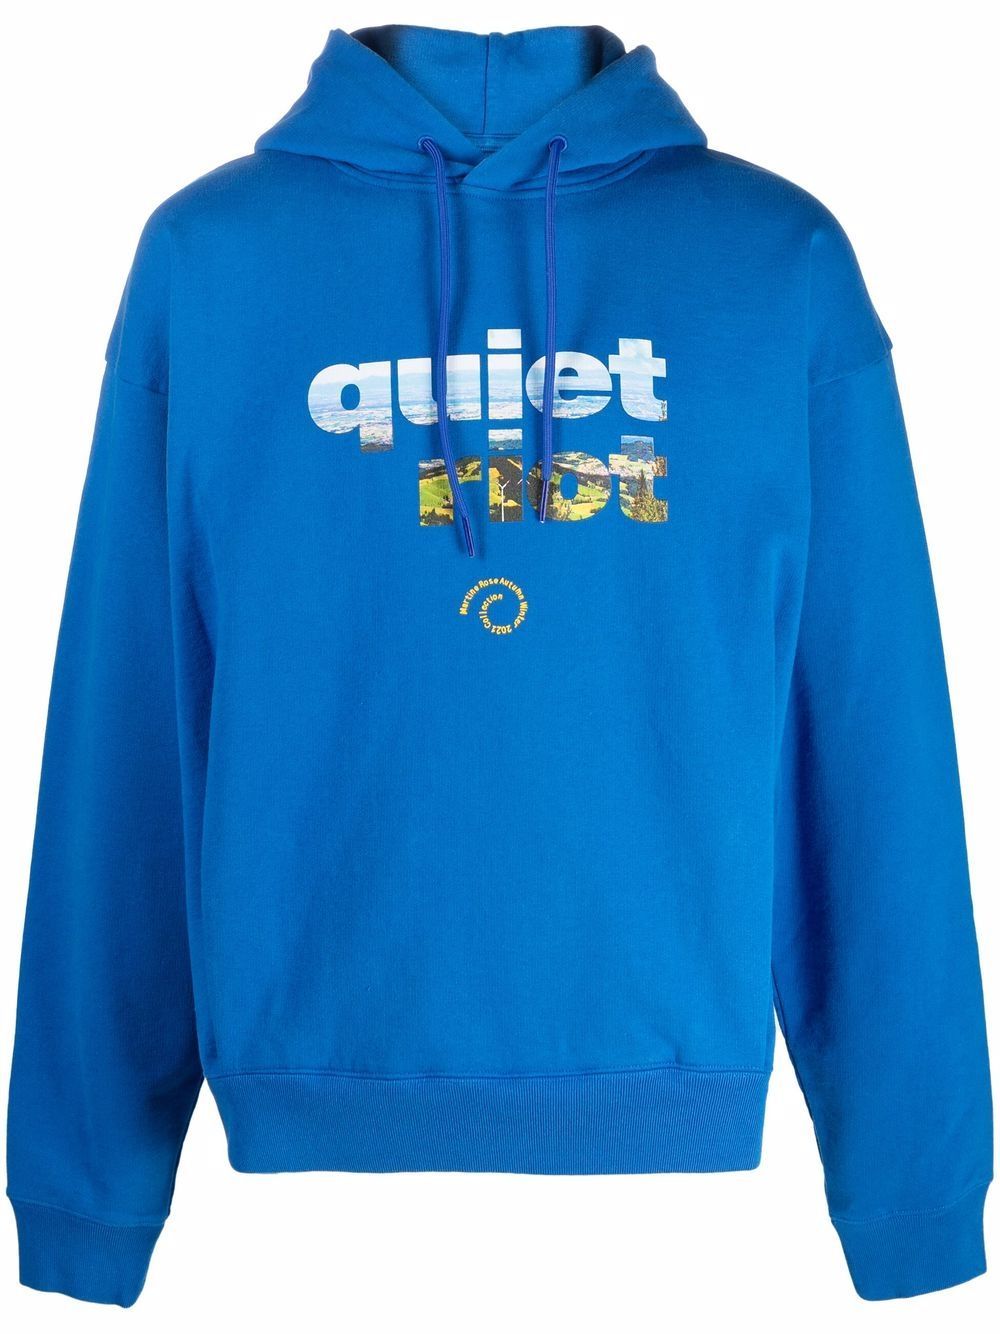 Cool Blue Hoodies - Quotes Viral